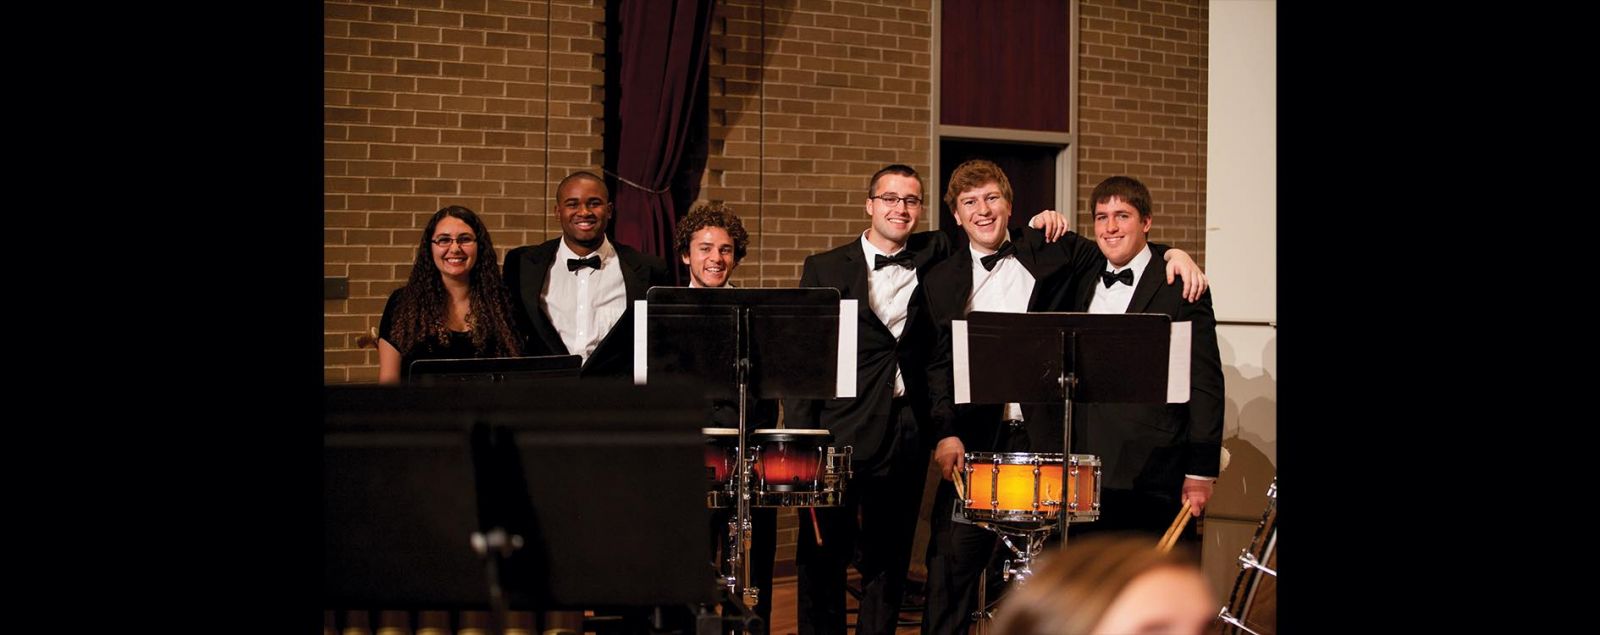 Percussionists smiling